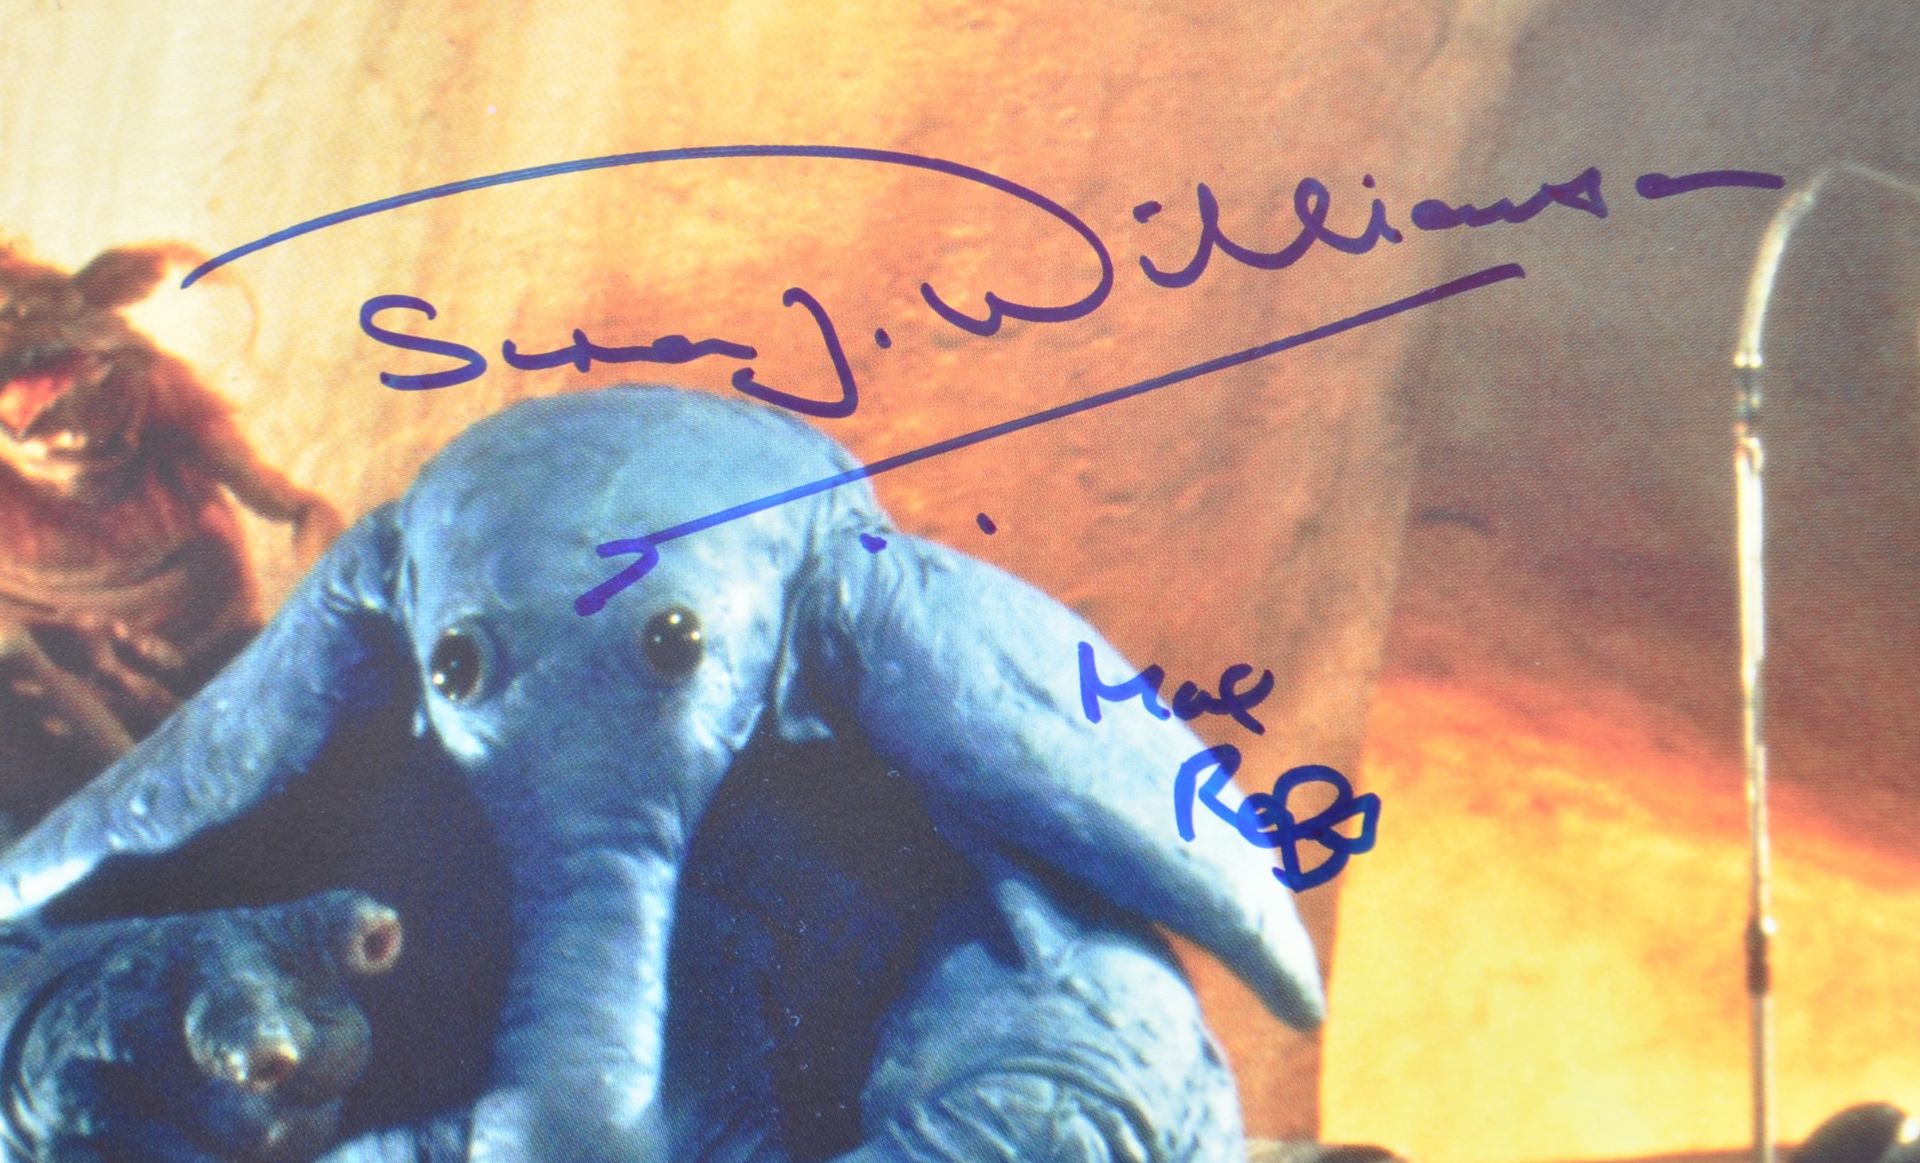 ESTATE OF DAVE PROWSE – STAR WARS OFFICIAL PIX CELEBRATION III SIGNED PHOTOS - Image 3 of 3